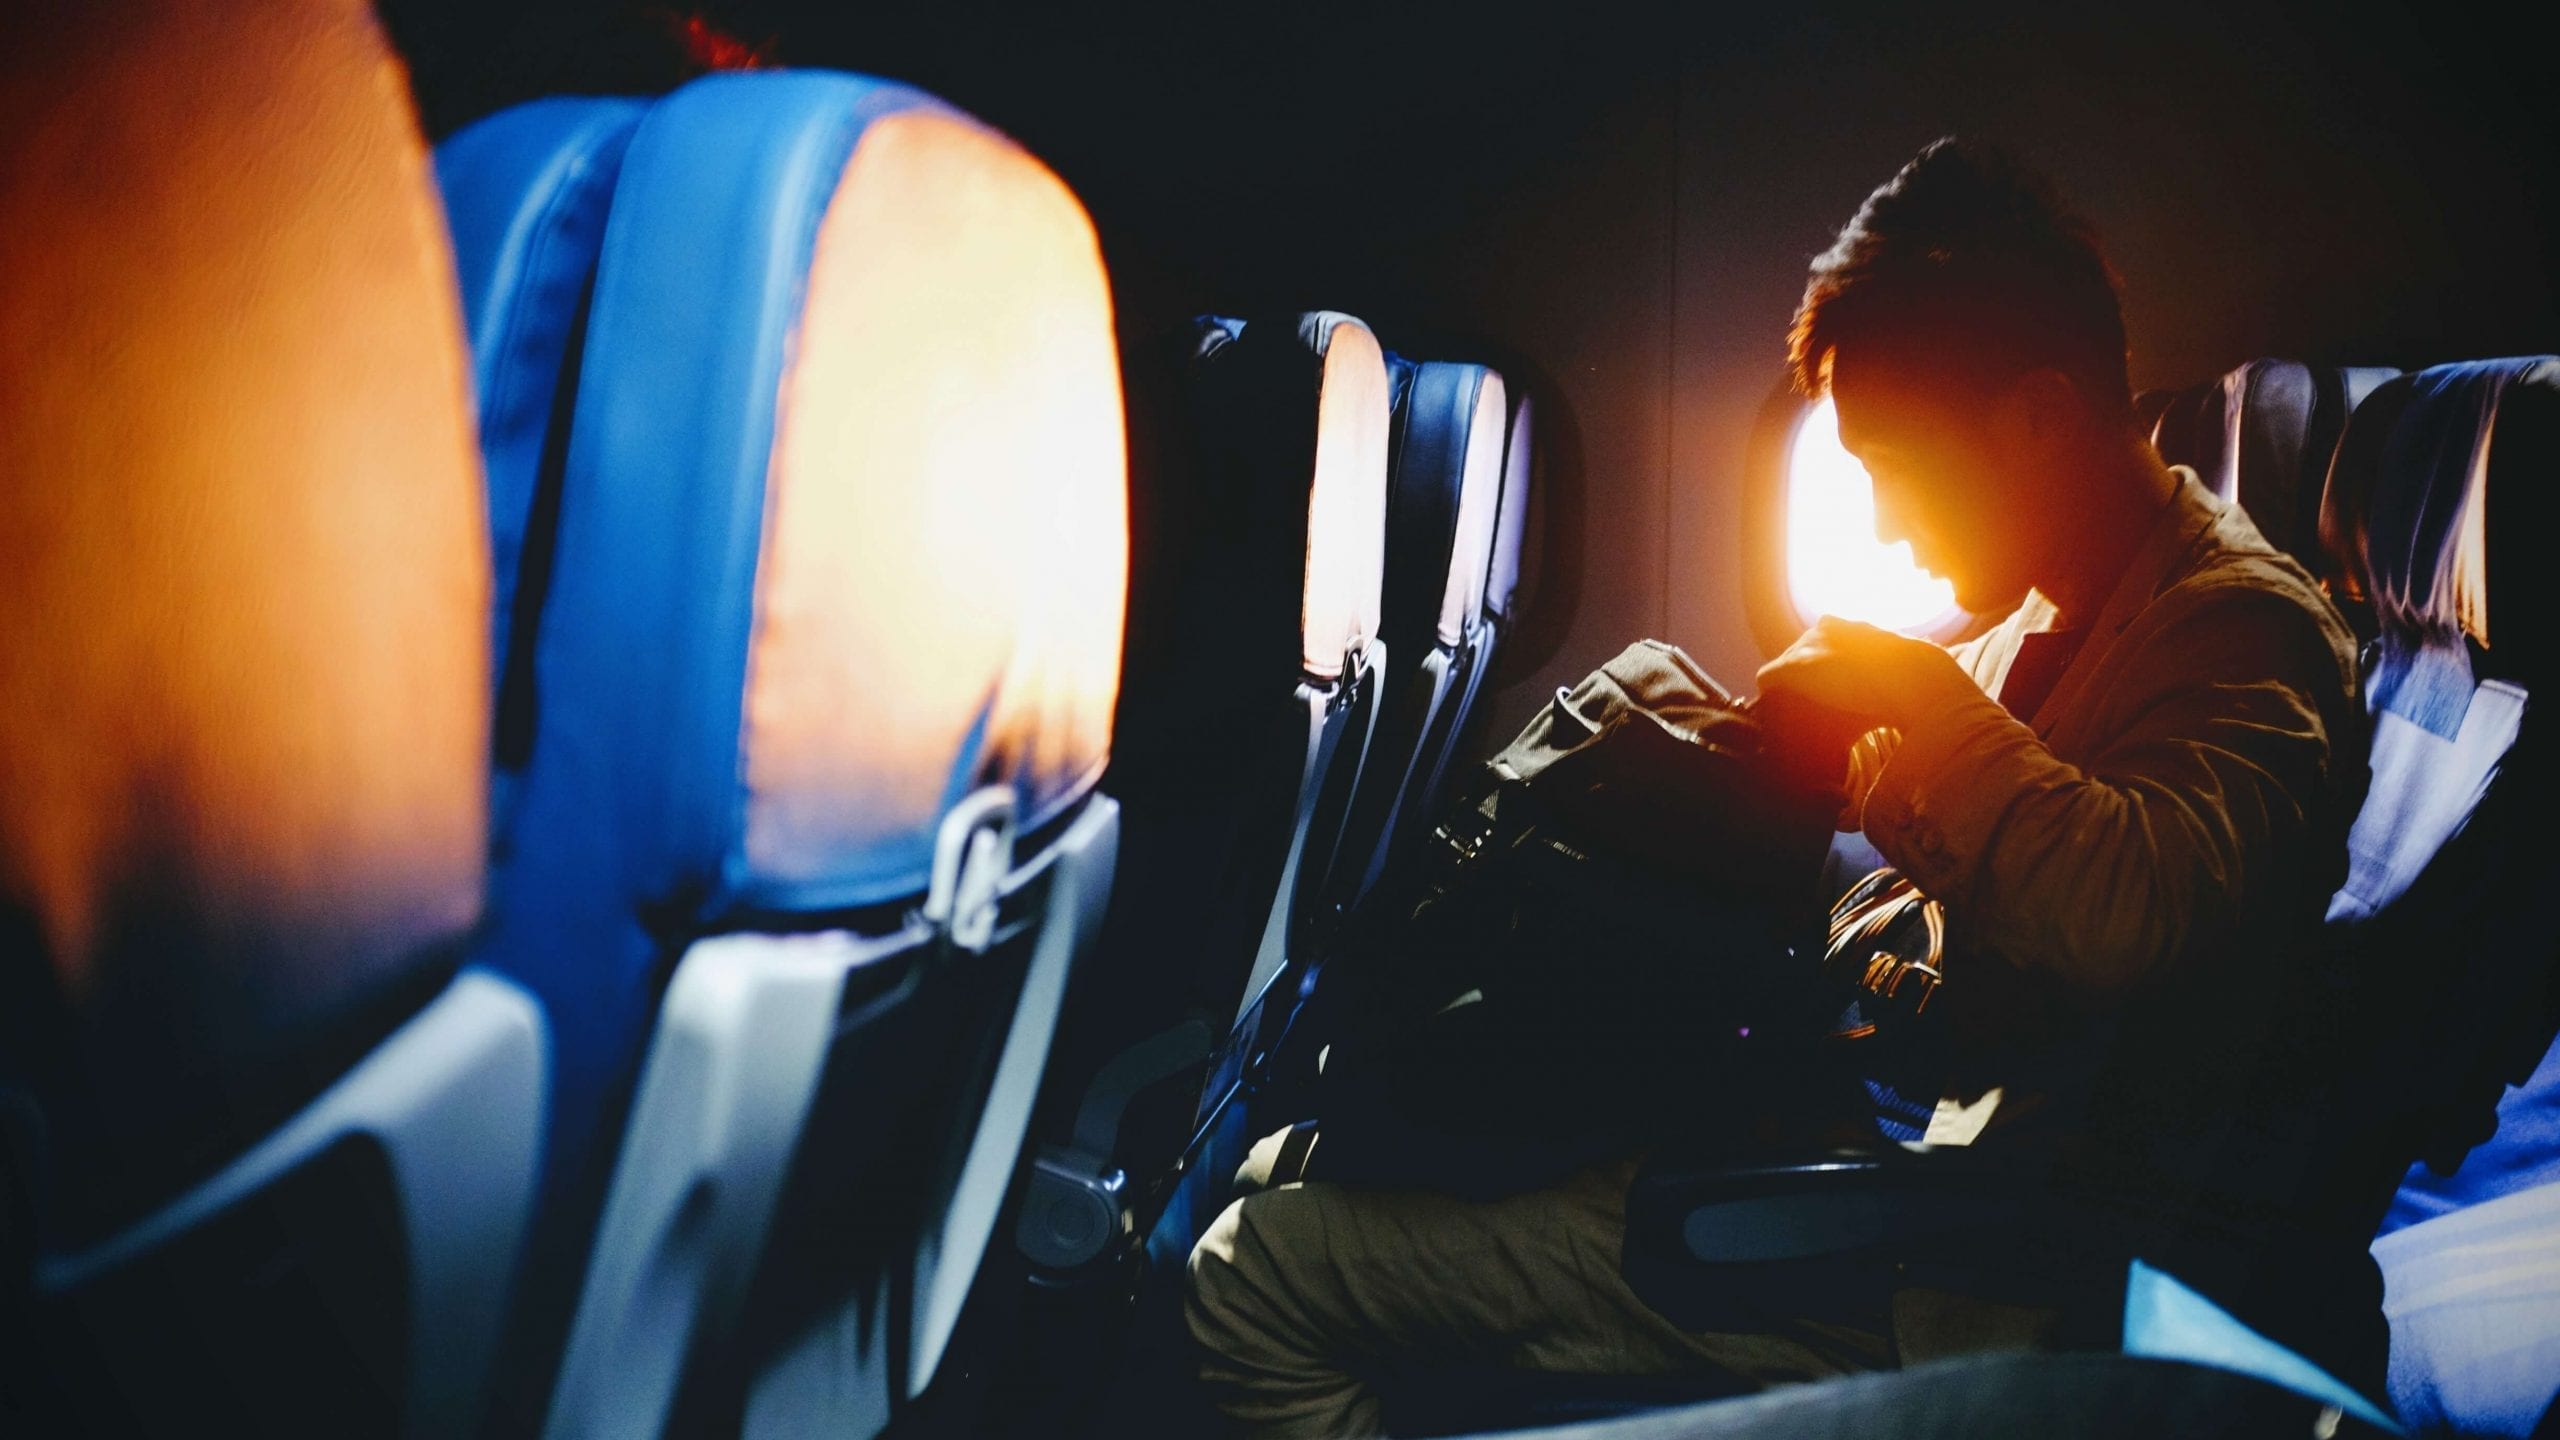 Man sit in a plane searching in his bag